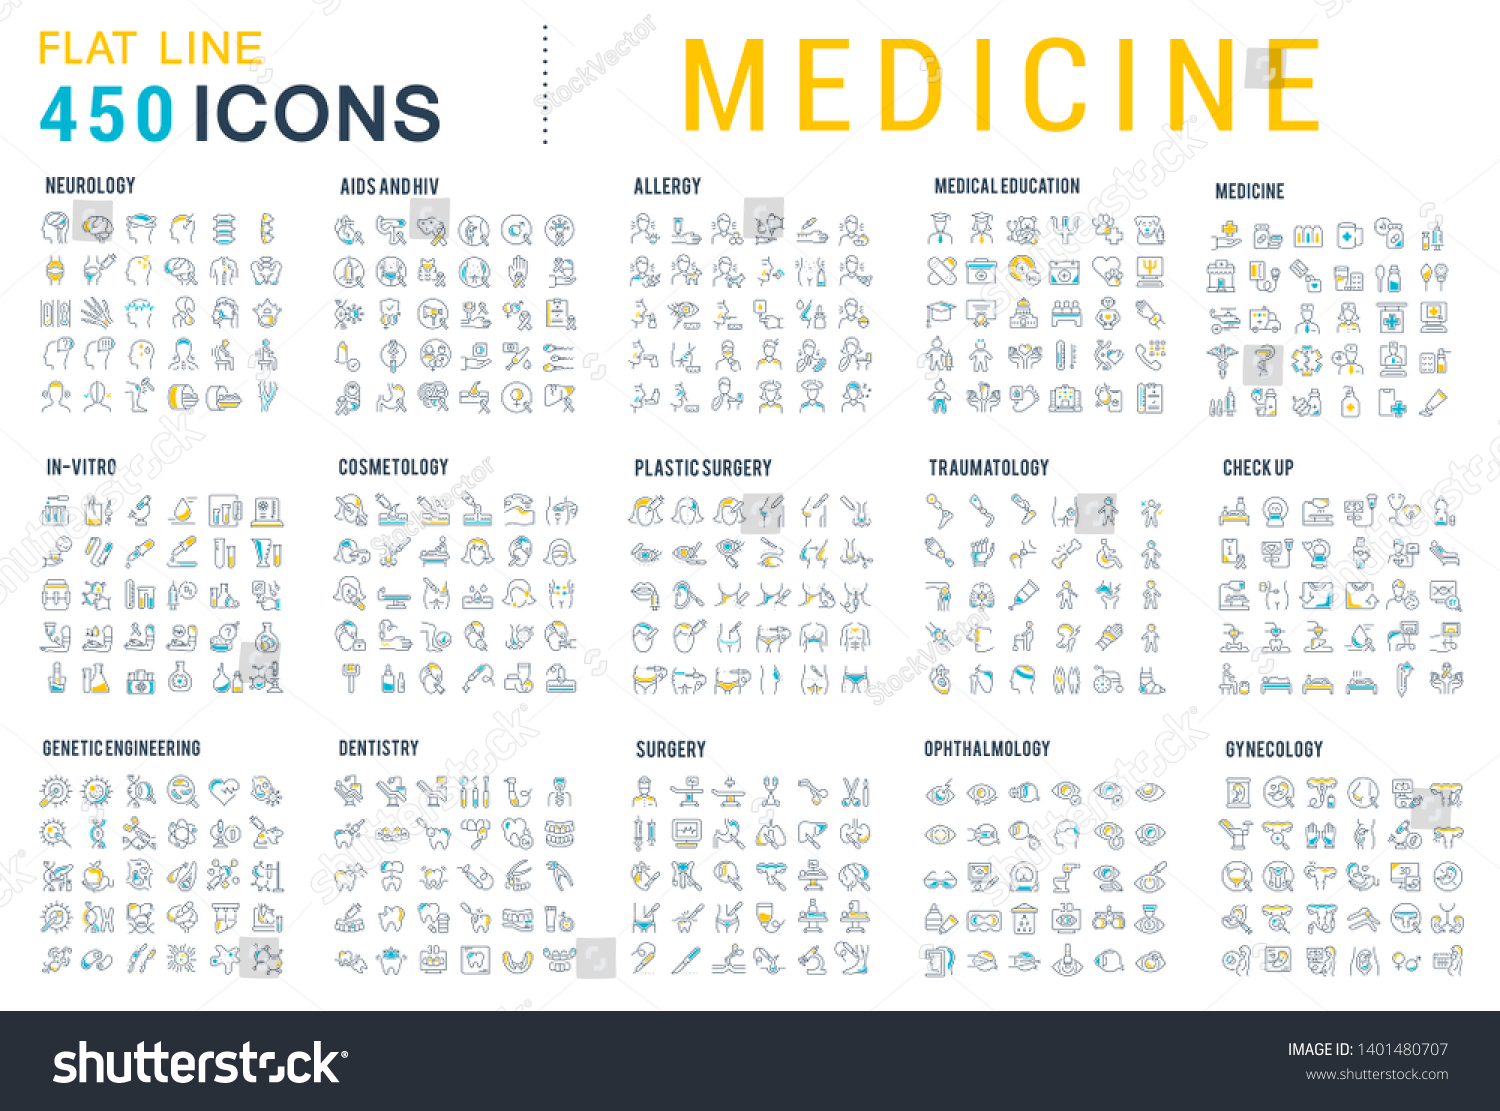 Collection of line icons of medicine. Surgery, dentistry, invitro, aids, cancer, check up, orthodontics, biology, vet, clinic, education. Set of flat signs and symbols for web and apps. #1401480707